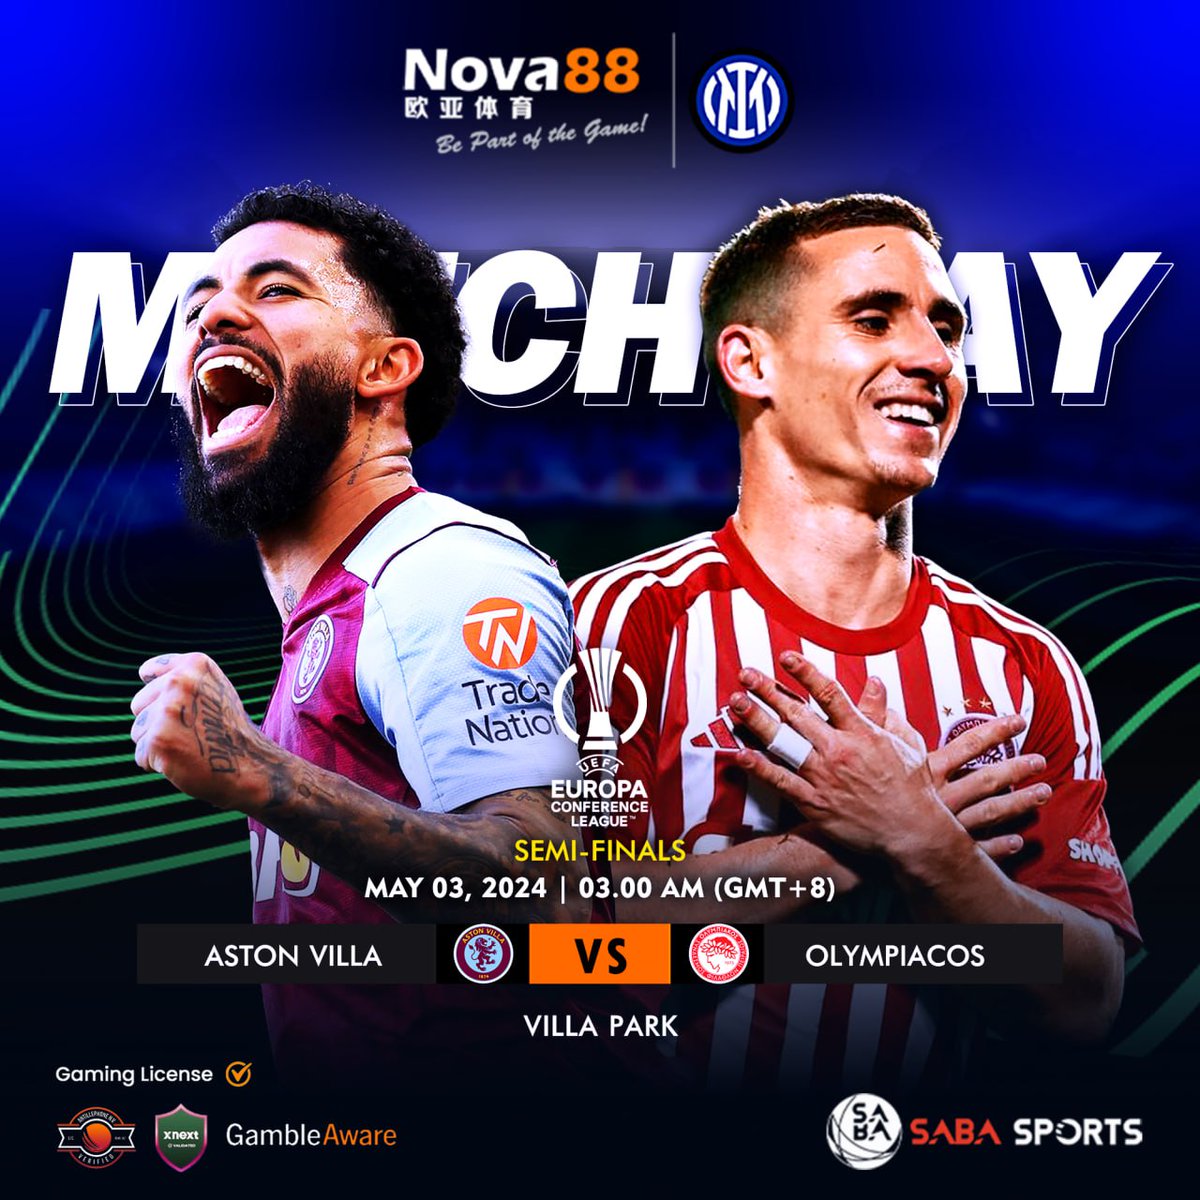 ⚔️🔥 The #EuropaConferenceLeague semis kicks off!

Get ready for a thrilling clash between Aston Villa and Olympiacos as they battle for a first-leg lead in their series! 🎉

Who will take the first leg? 💯

#Nova88 #BePartOfTheGame